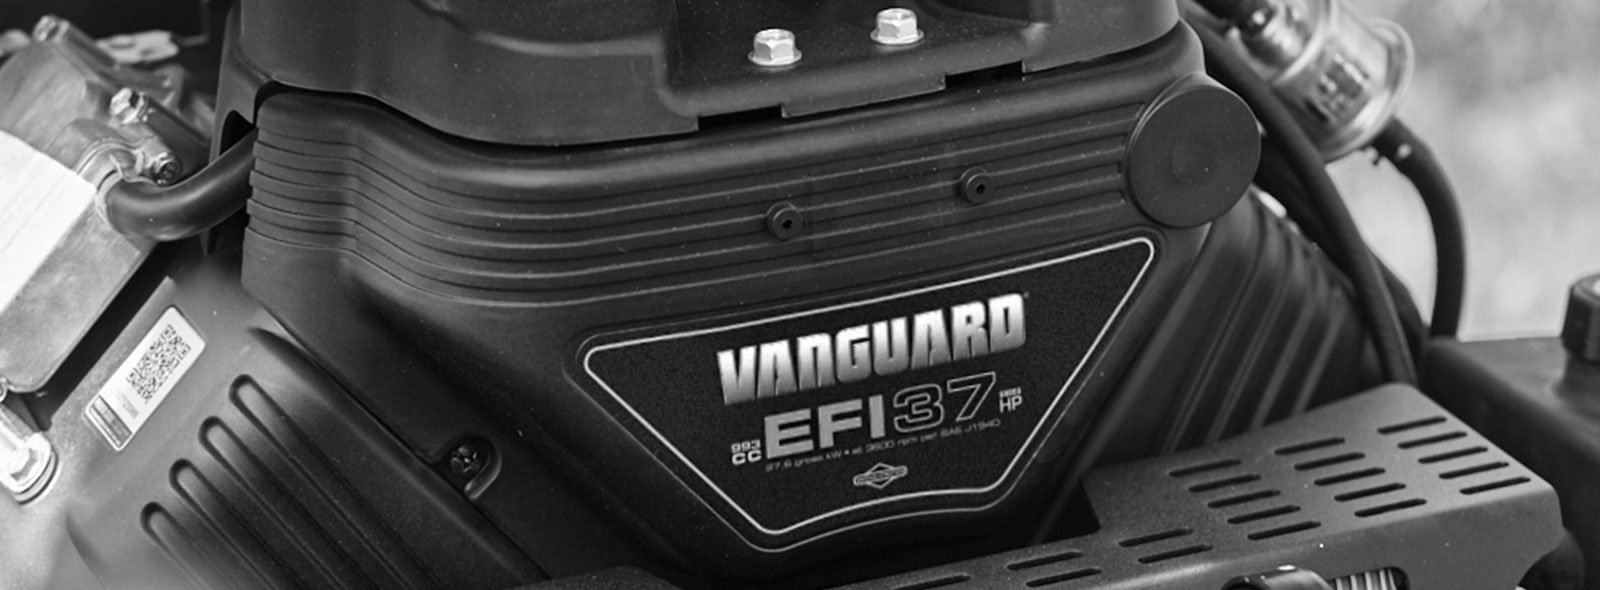 Vanguard Commercial Power Product Catalog 